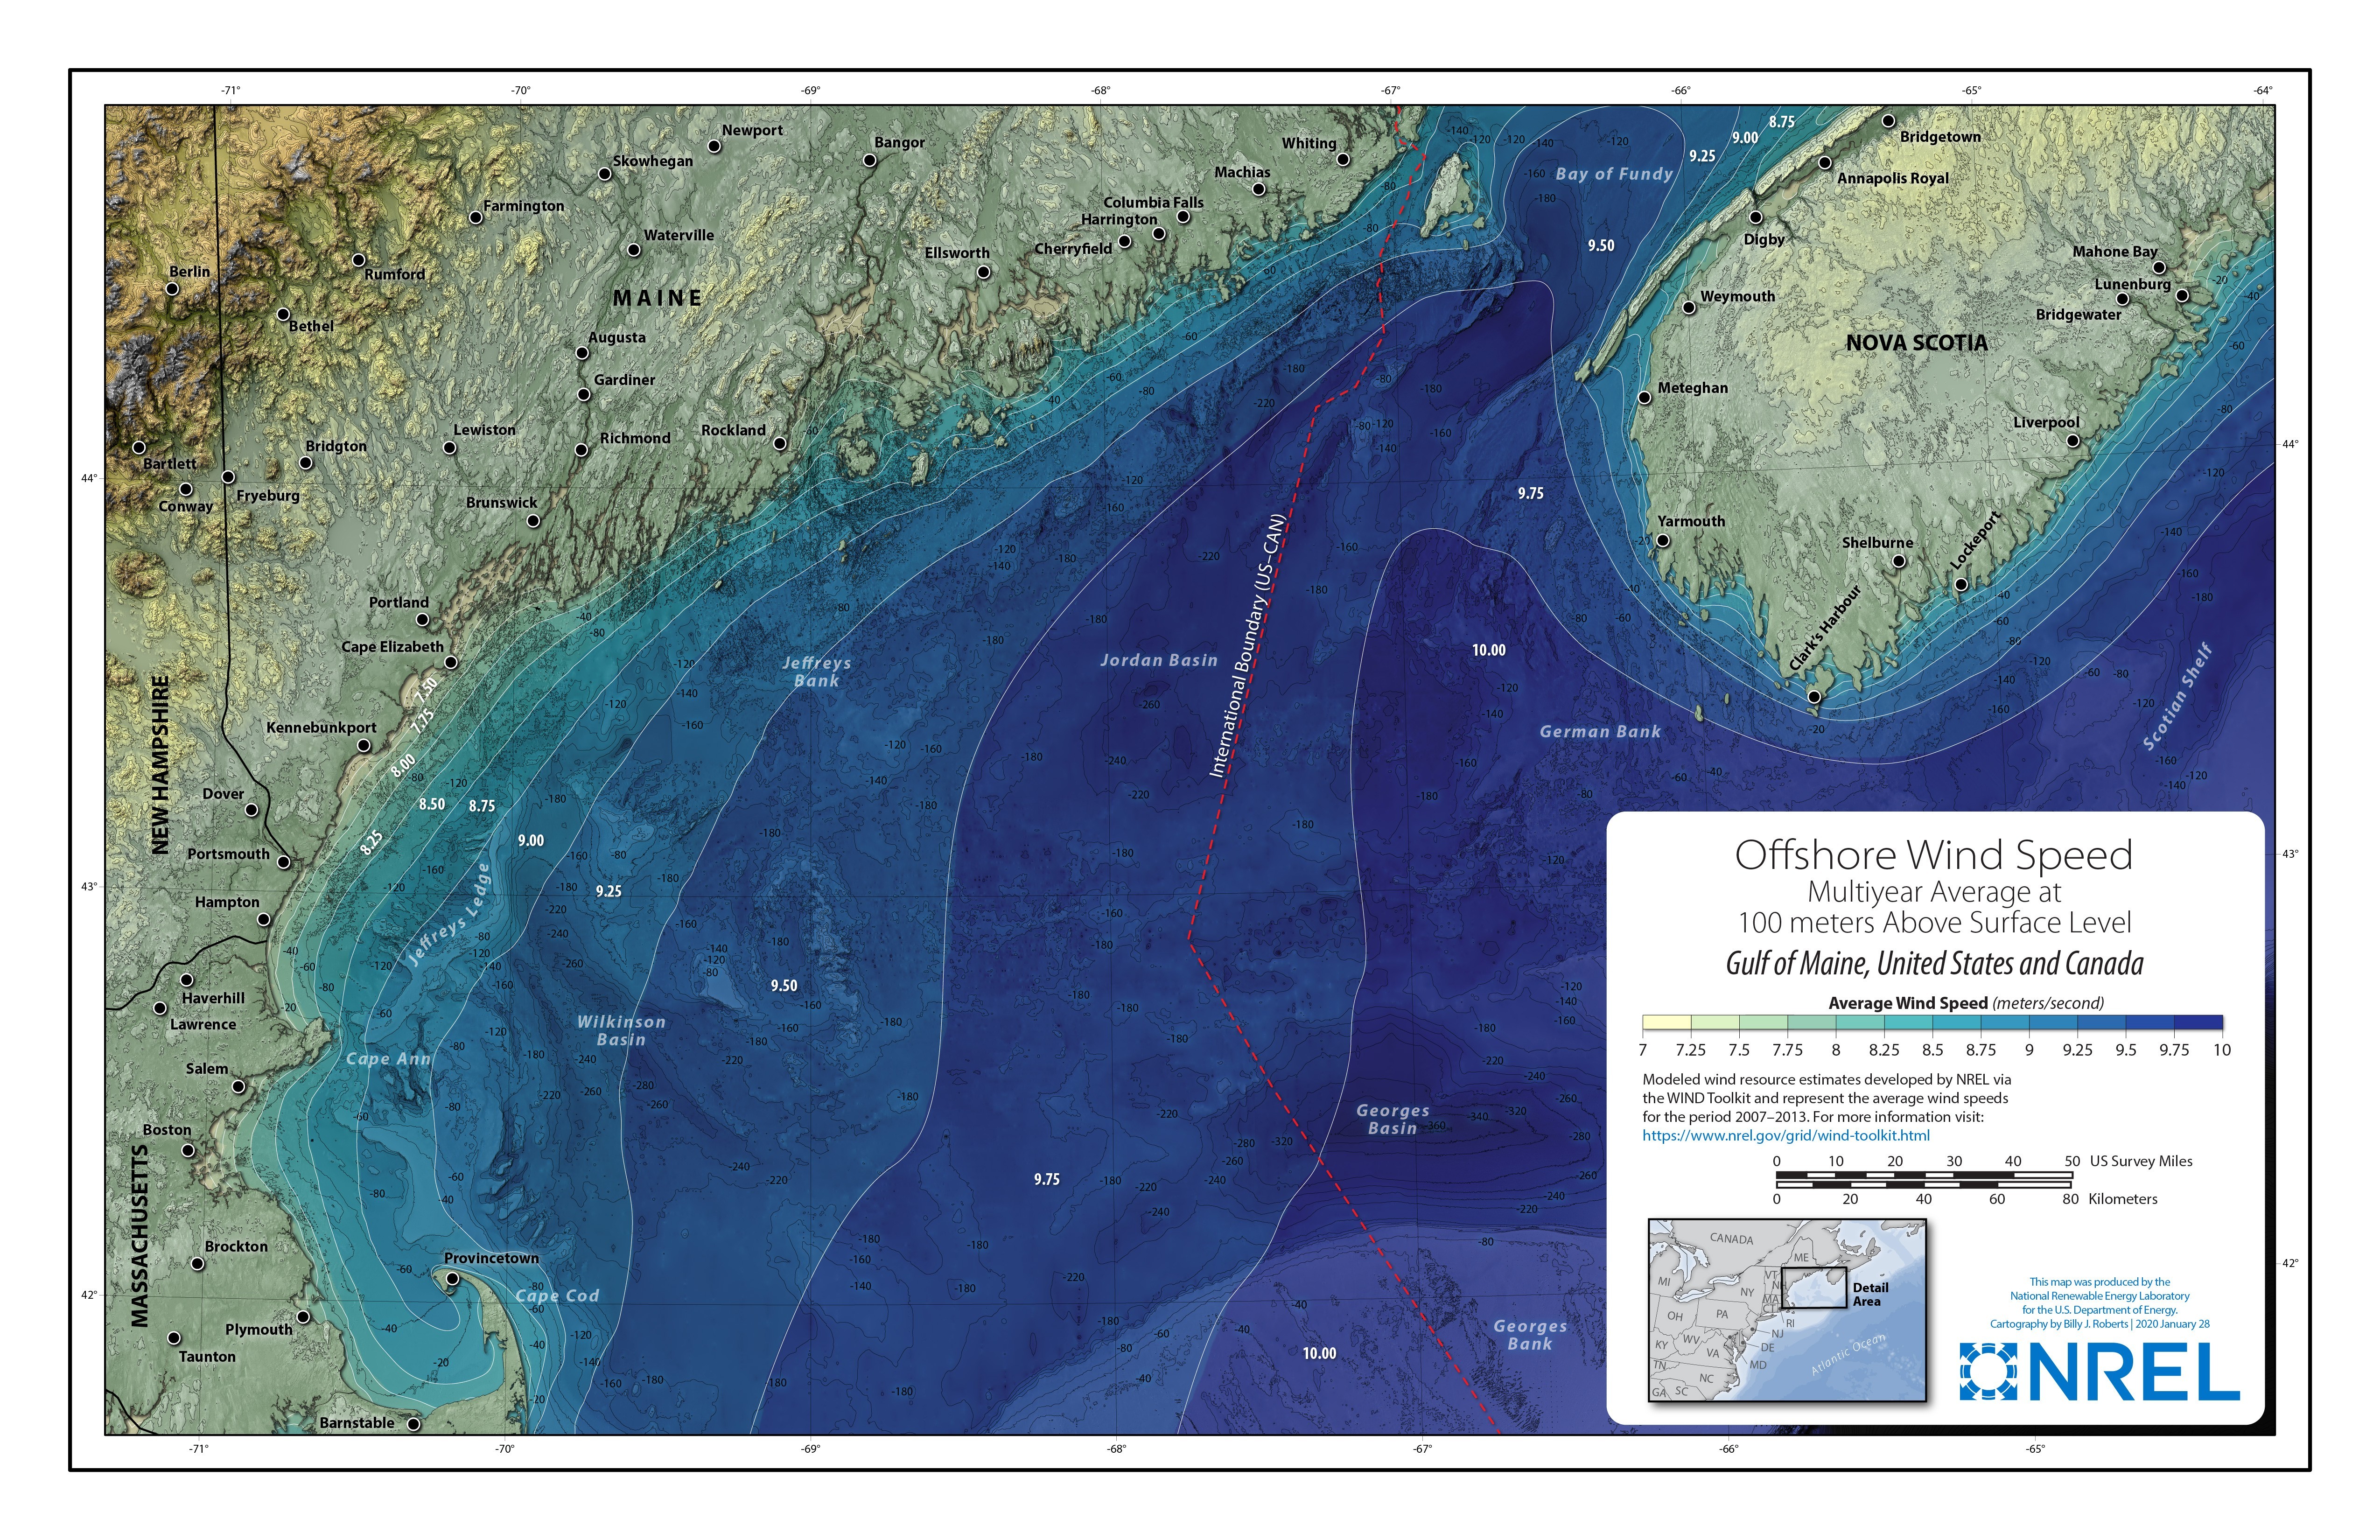 wind resource map depicting teh coast of Maine